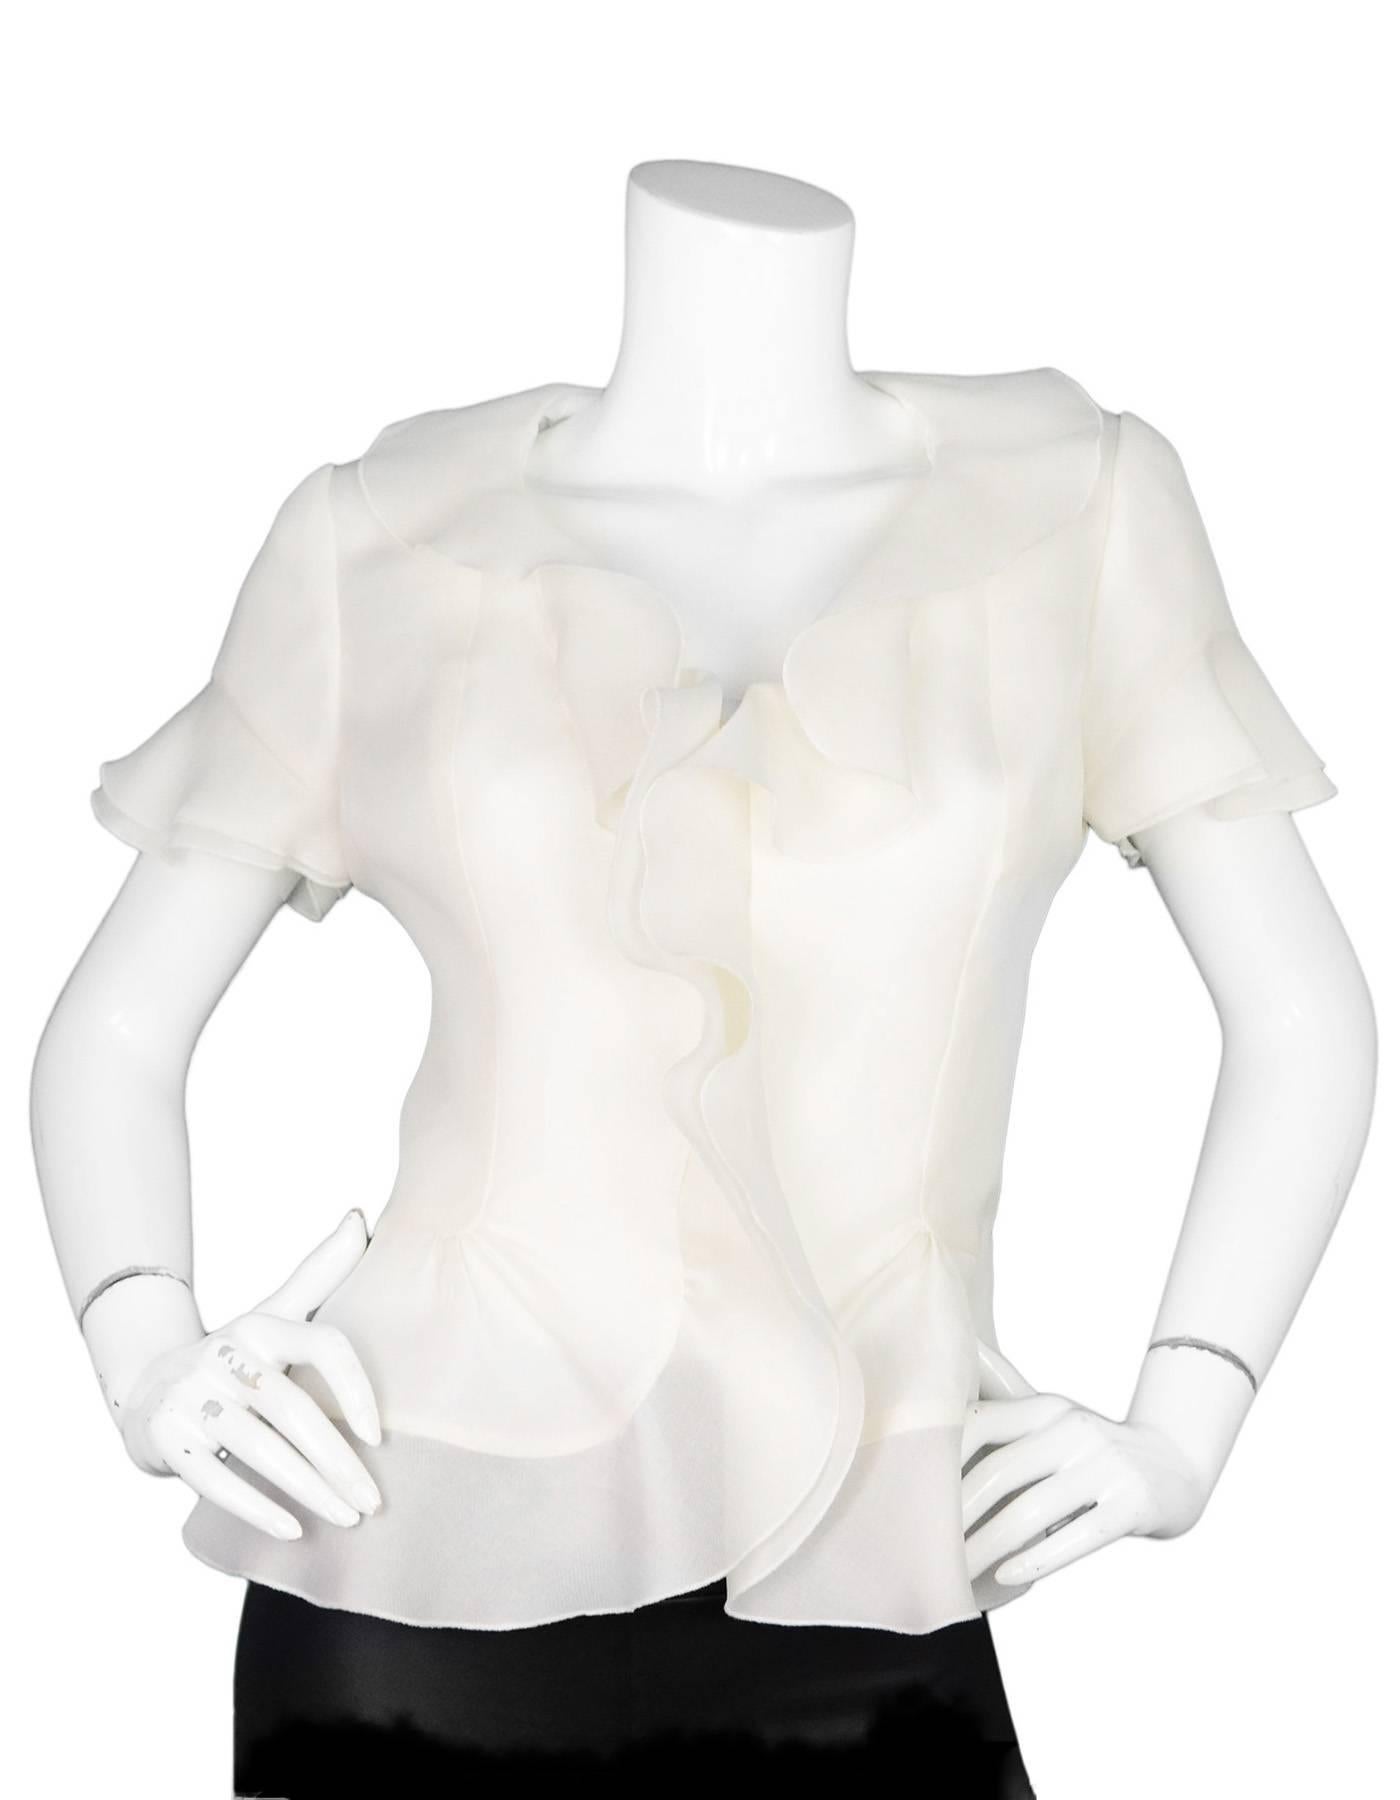 Jackie Rogers White Ruffle Organza Blouse  

Color: White
Composition: Believed to be a silk blend
Lining: White, believed to be a silk blend
Closure/Opening: Button down front
Exterior Pockets: None
Interior Pockets: None
Overall Condition: